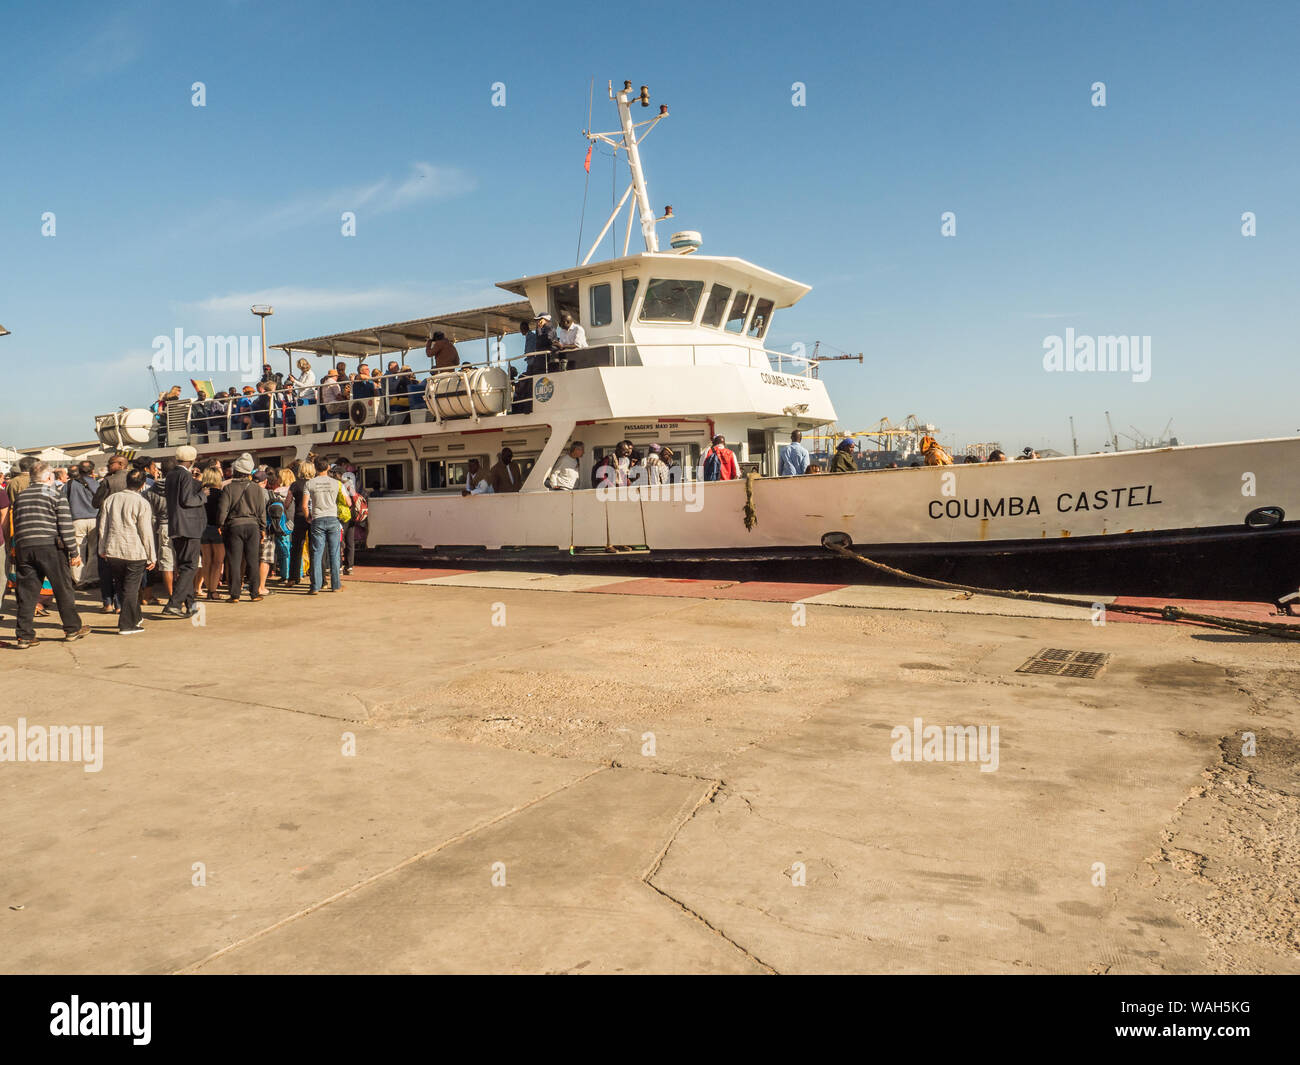 Dakar, Senegal - February 2, 2019: People waiting for the boat transporting people from Dakar to Goree island in port in Dakar. Gorée. Dakar, Senegal. Stock Photo